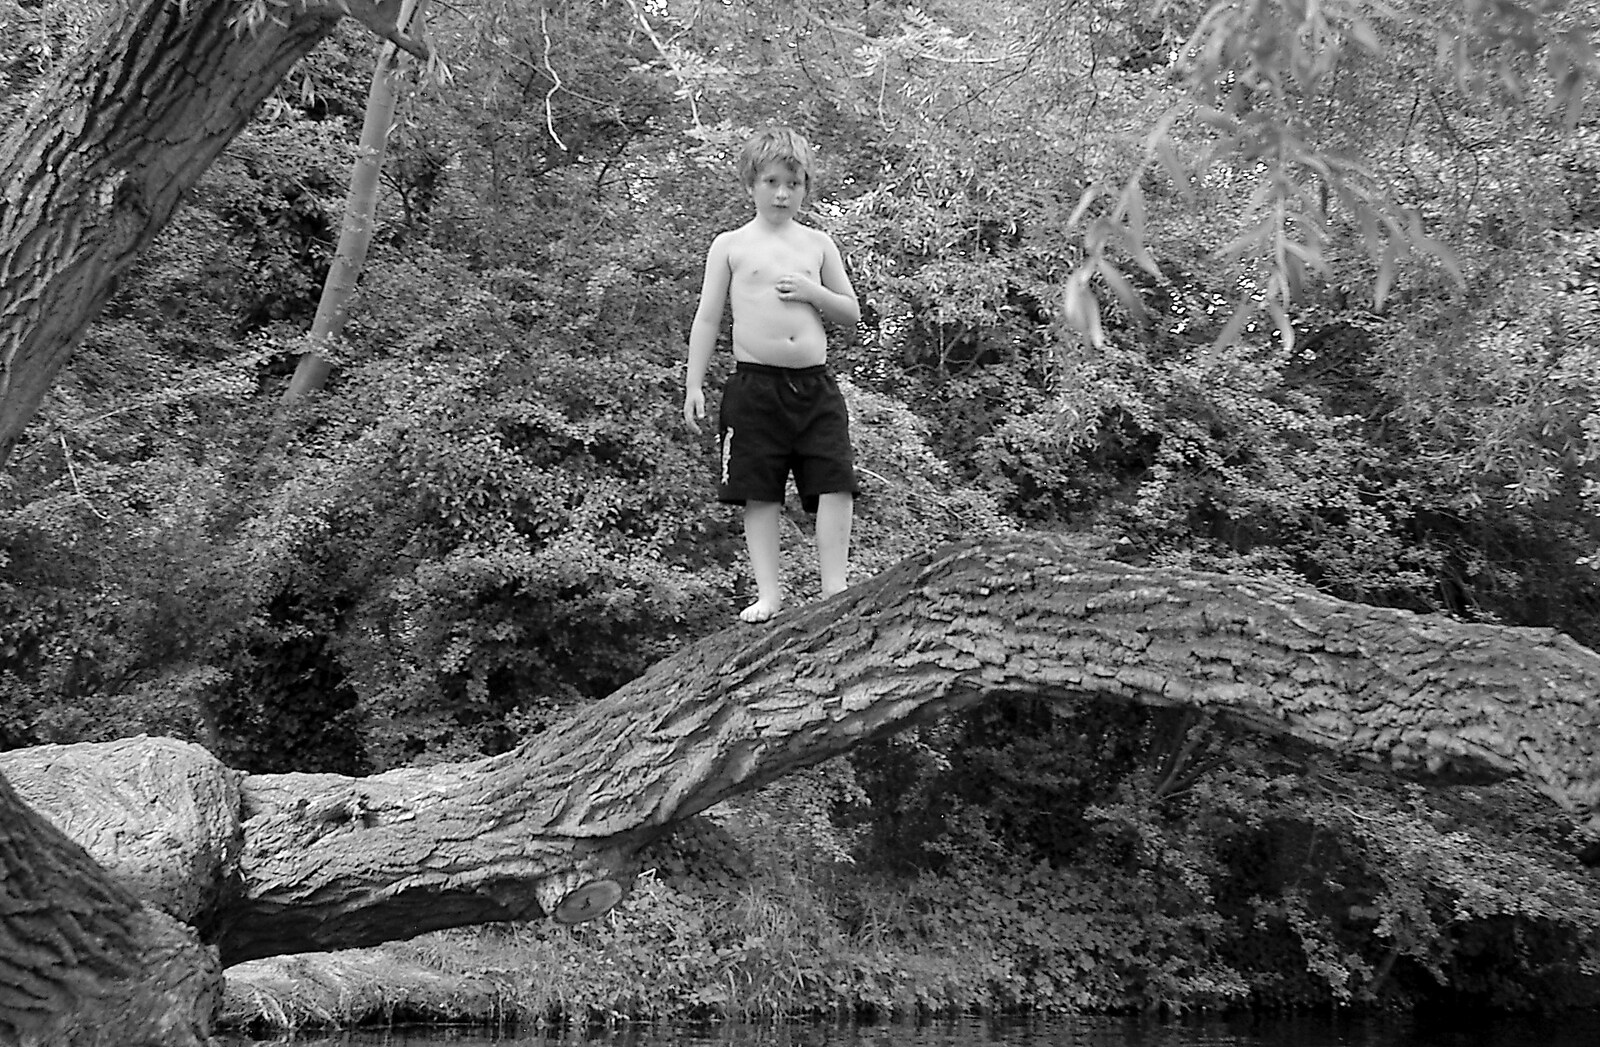 A strange feral boy waits in a tree from Qualcomm goes Punting on the Cam, Grantchester Meadows, Cambridge - 18th August 2005